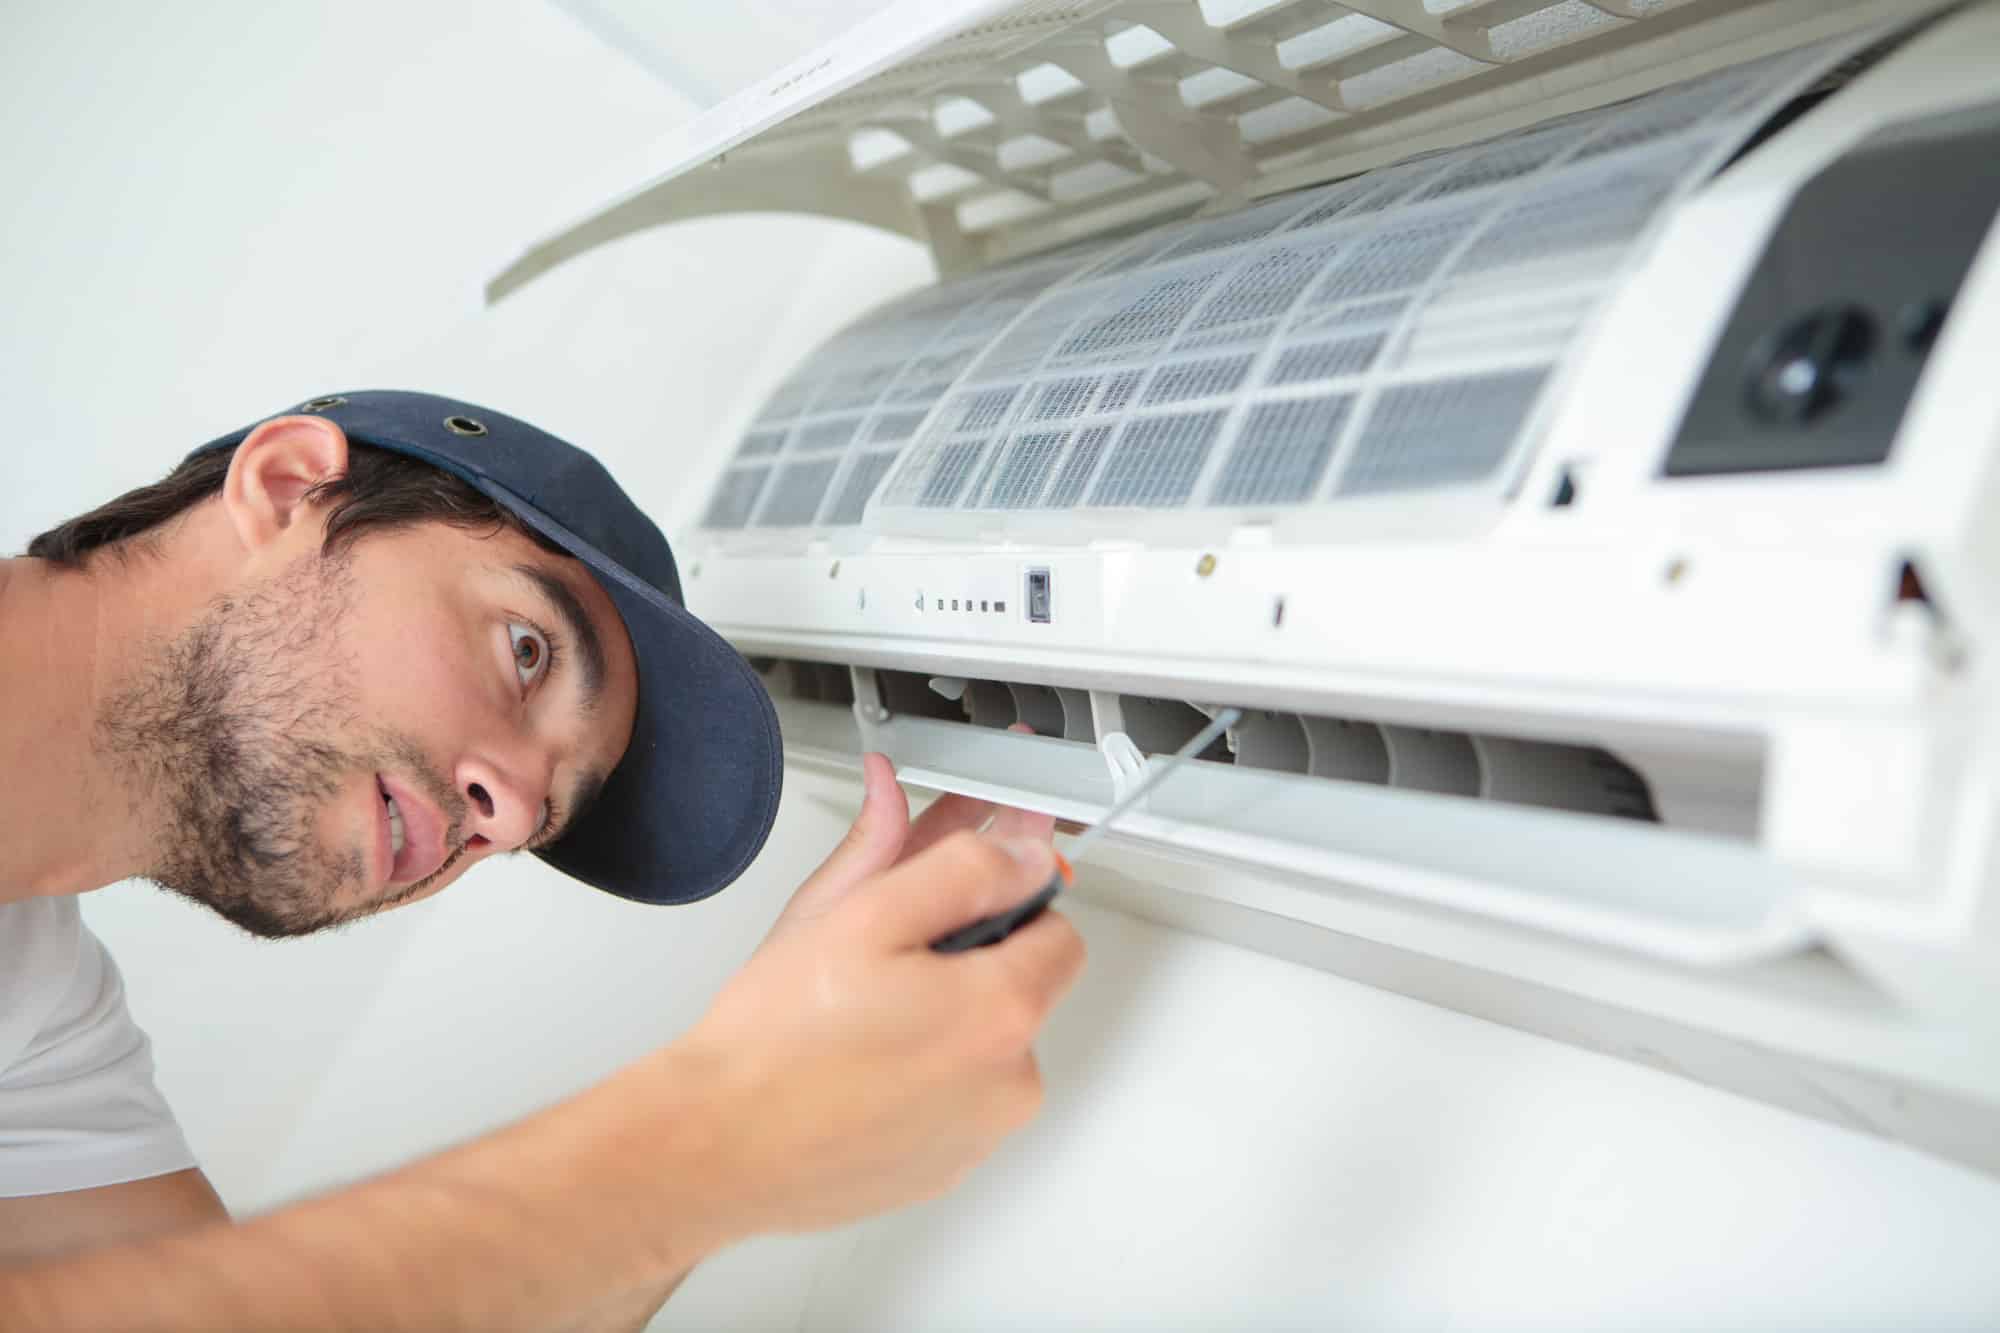 Is My Air Conditioner Broken? 7 Signs You Need an HVAC Repair